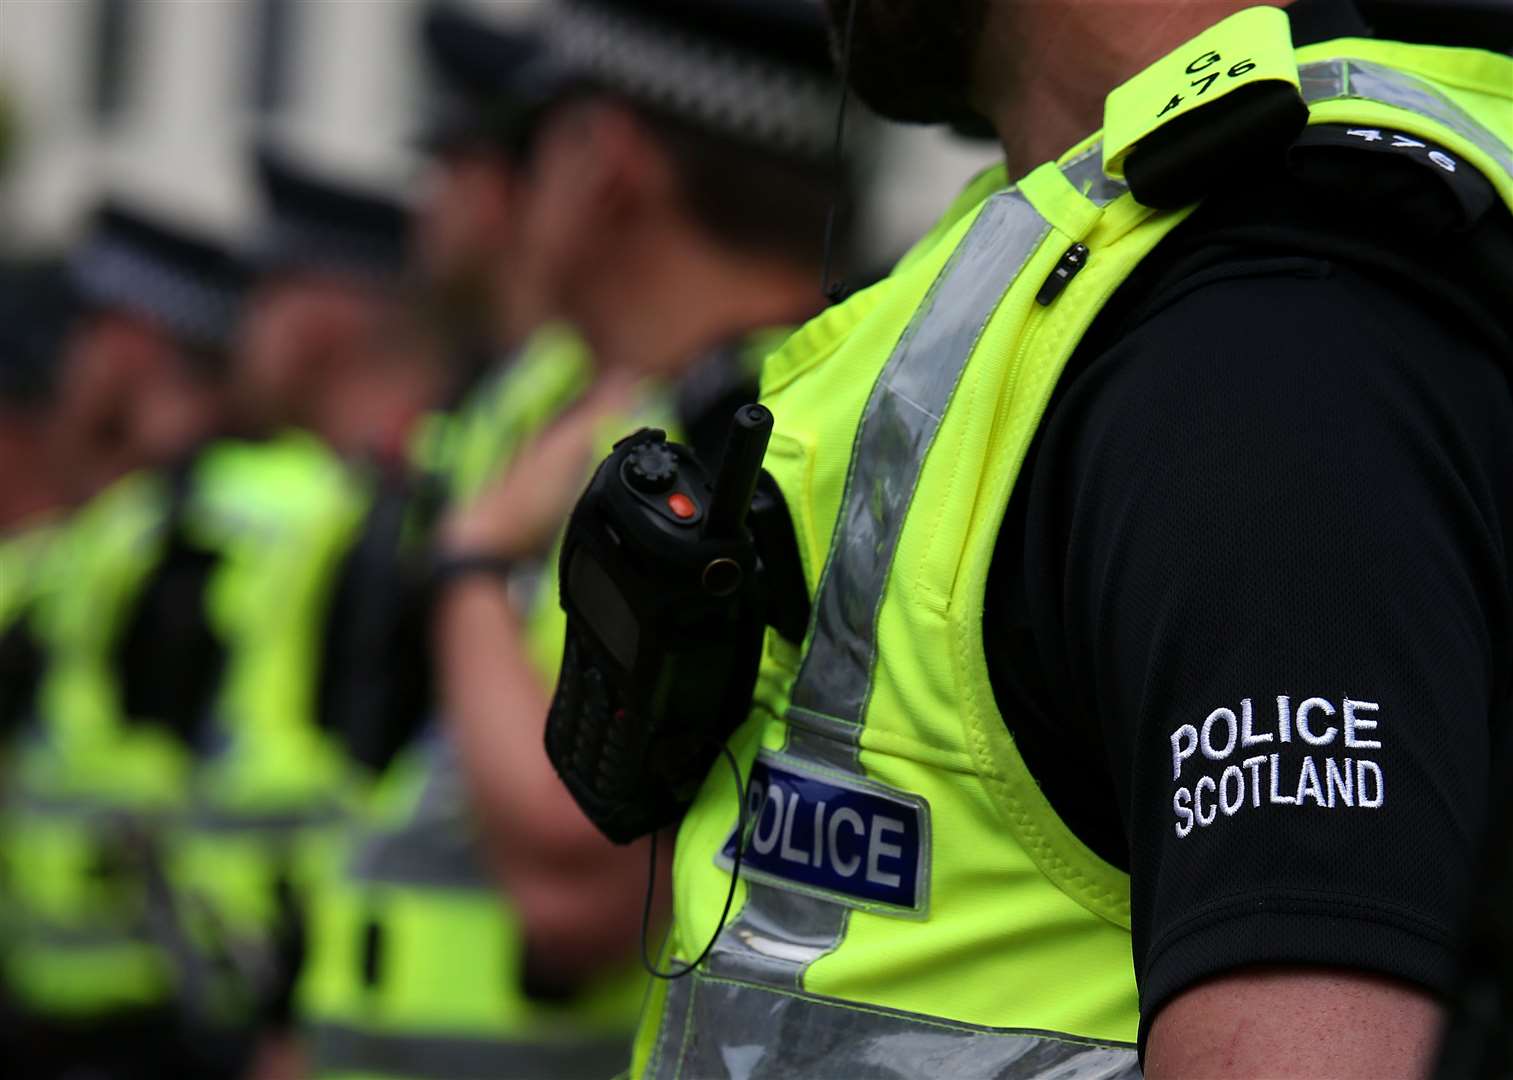 Police Scotland said hate incidents were important to track unrest within communities (Andrew Milligan/PA)